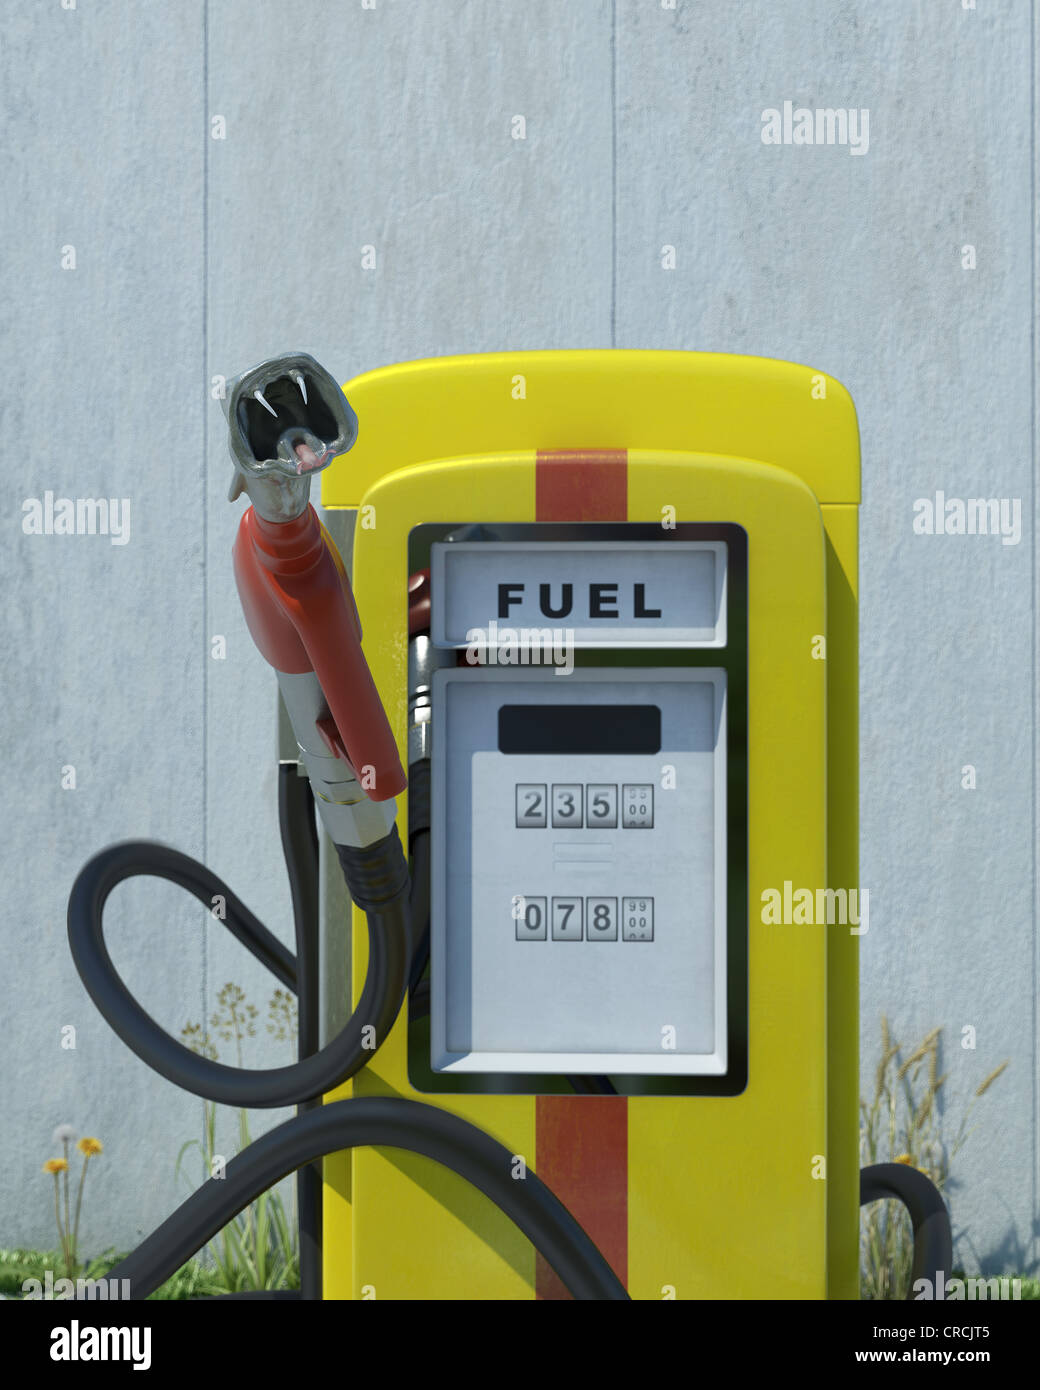 Petrol pump labelled with Fuel, with the nozzle in the form of a serpent's head, symbolic image Stock Photo